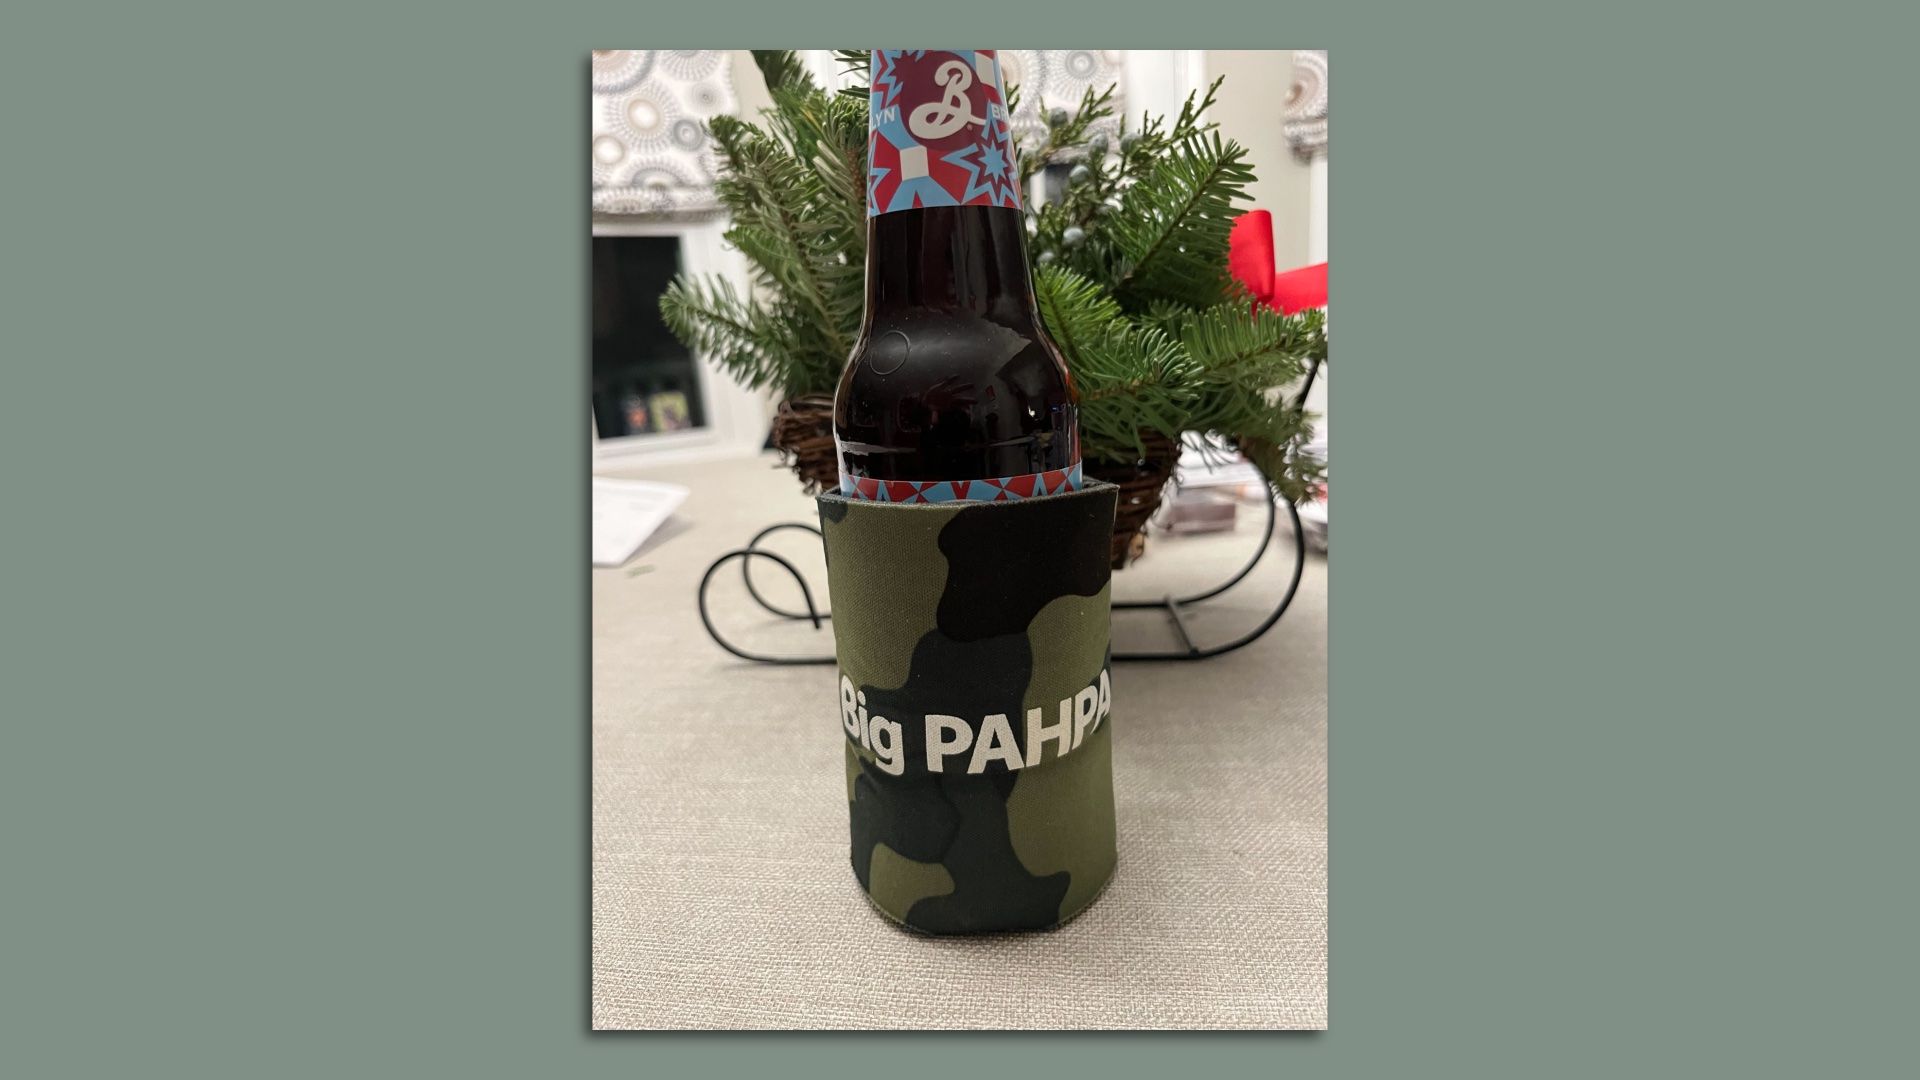 A beer with a koozy that says "Big PAHPA"